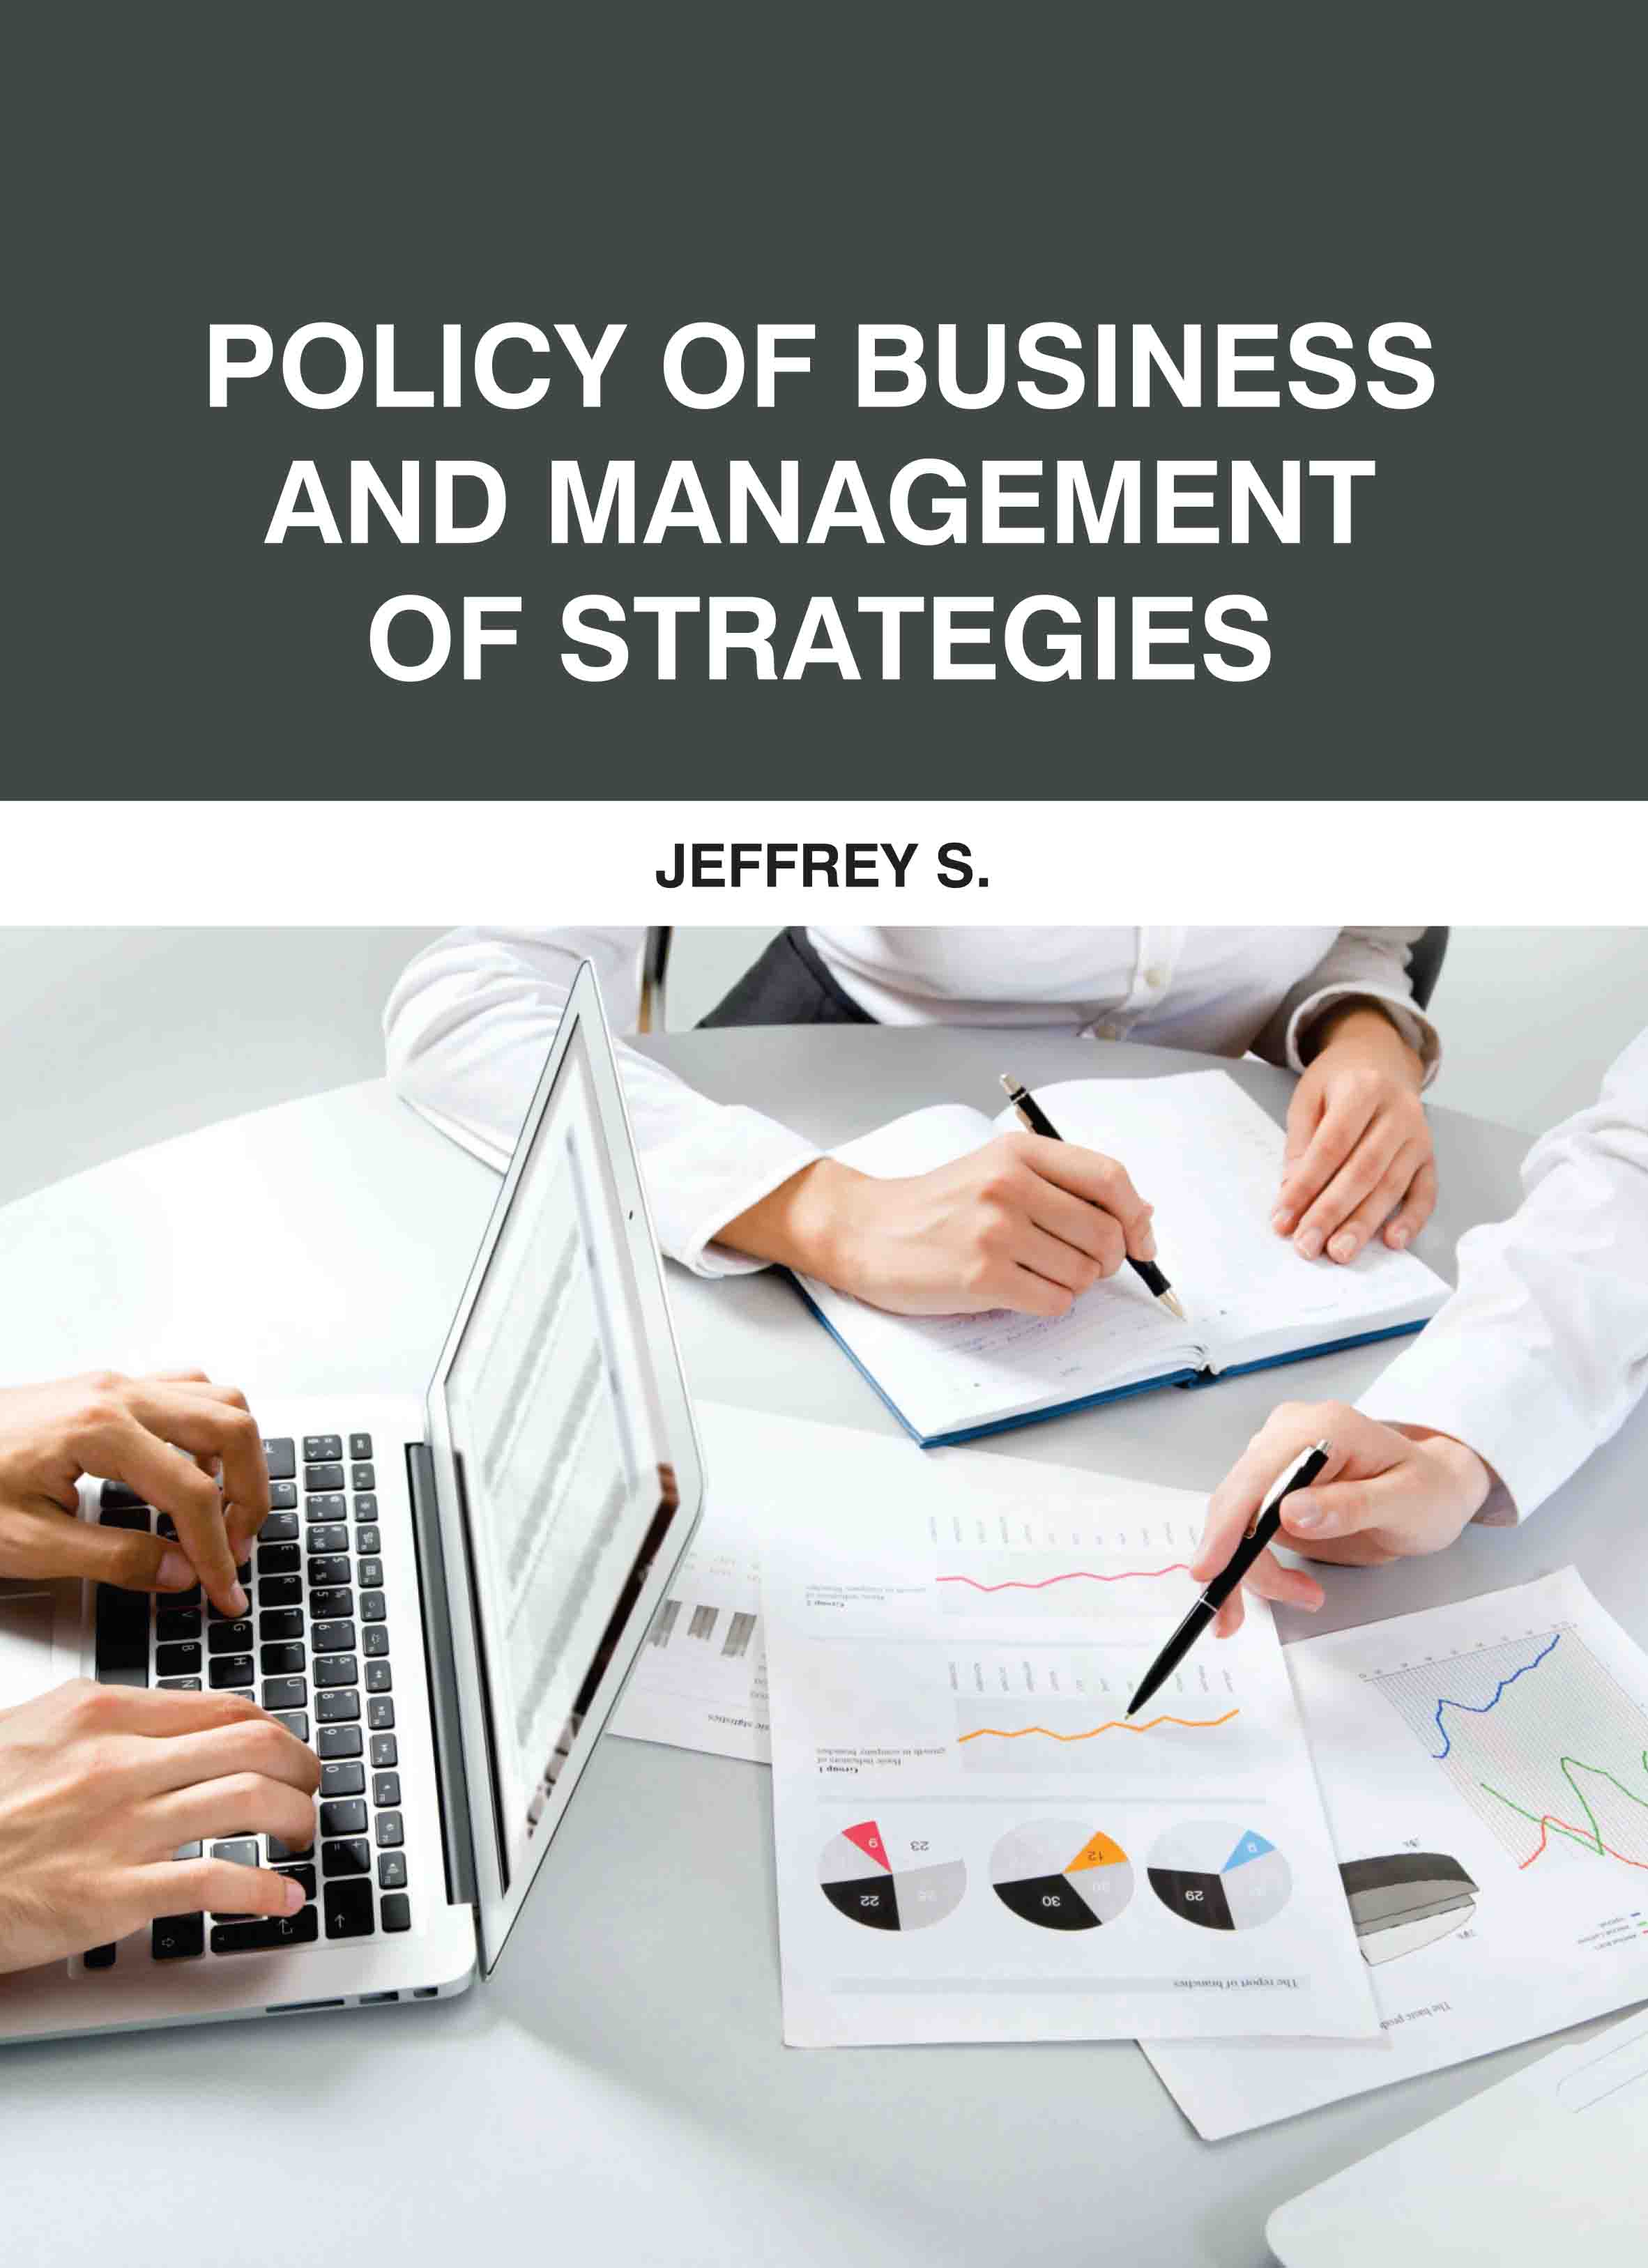 Policy of Business and Management of Strategies